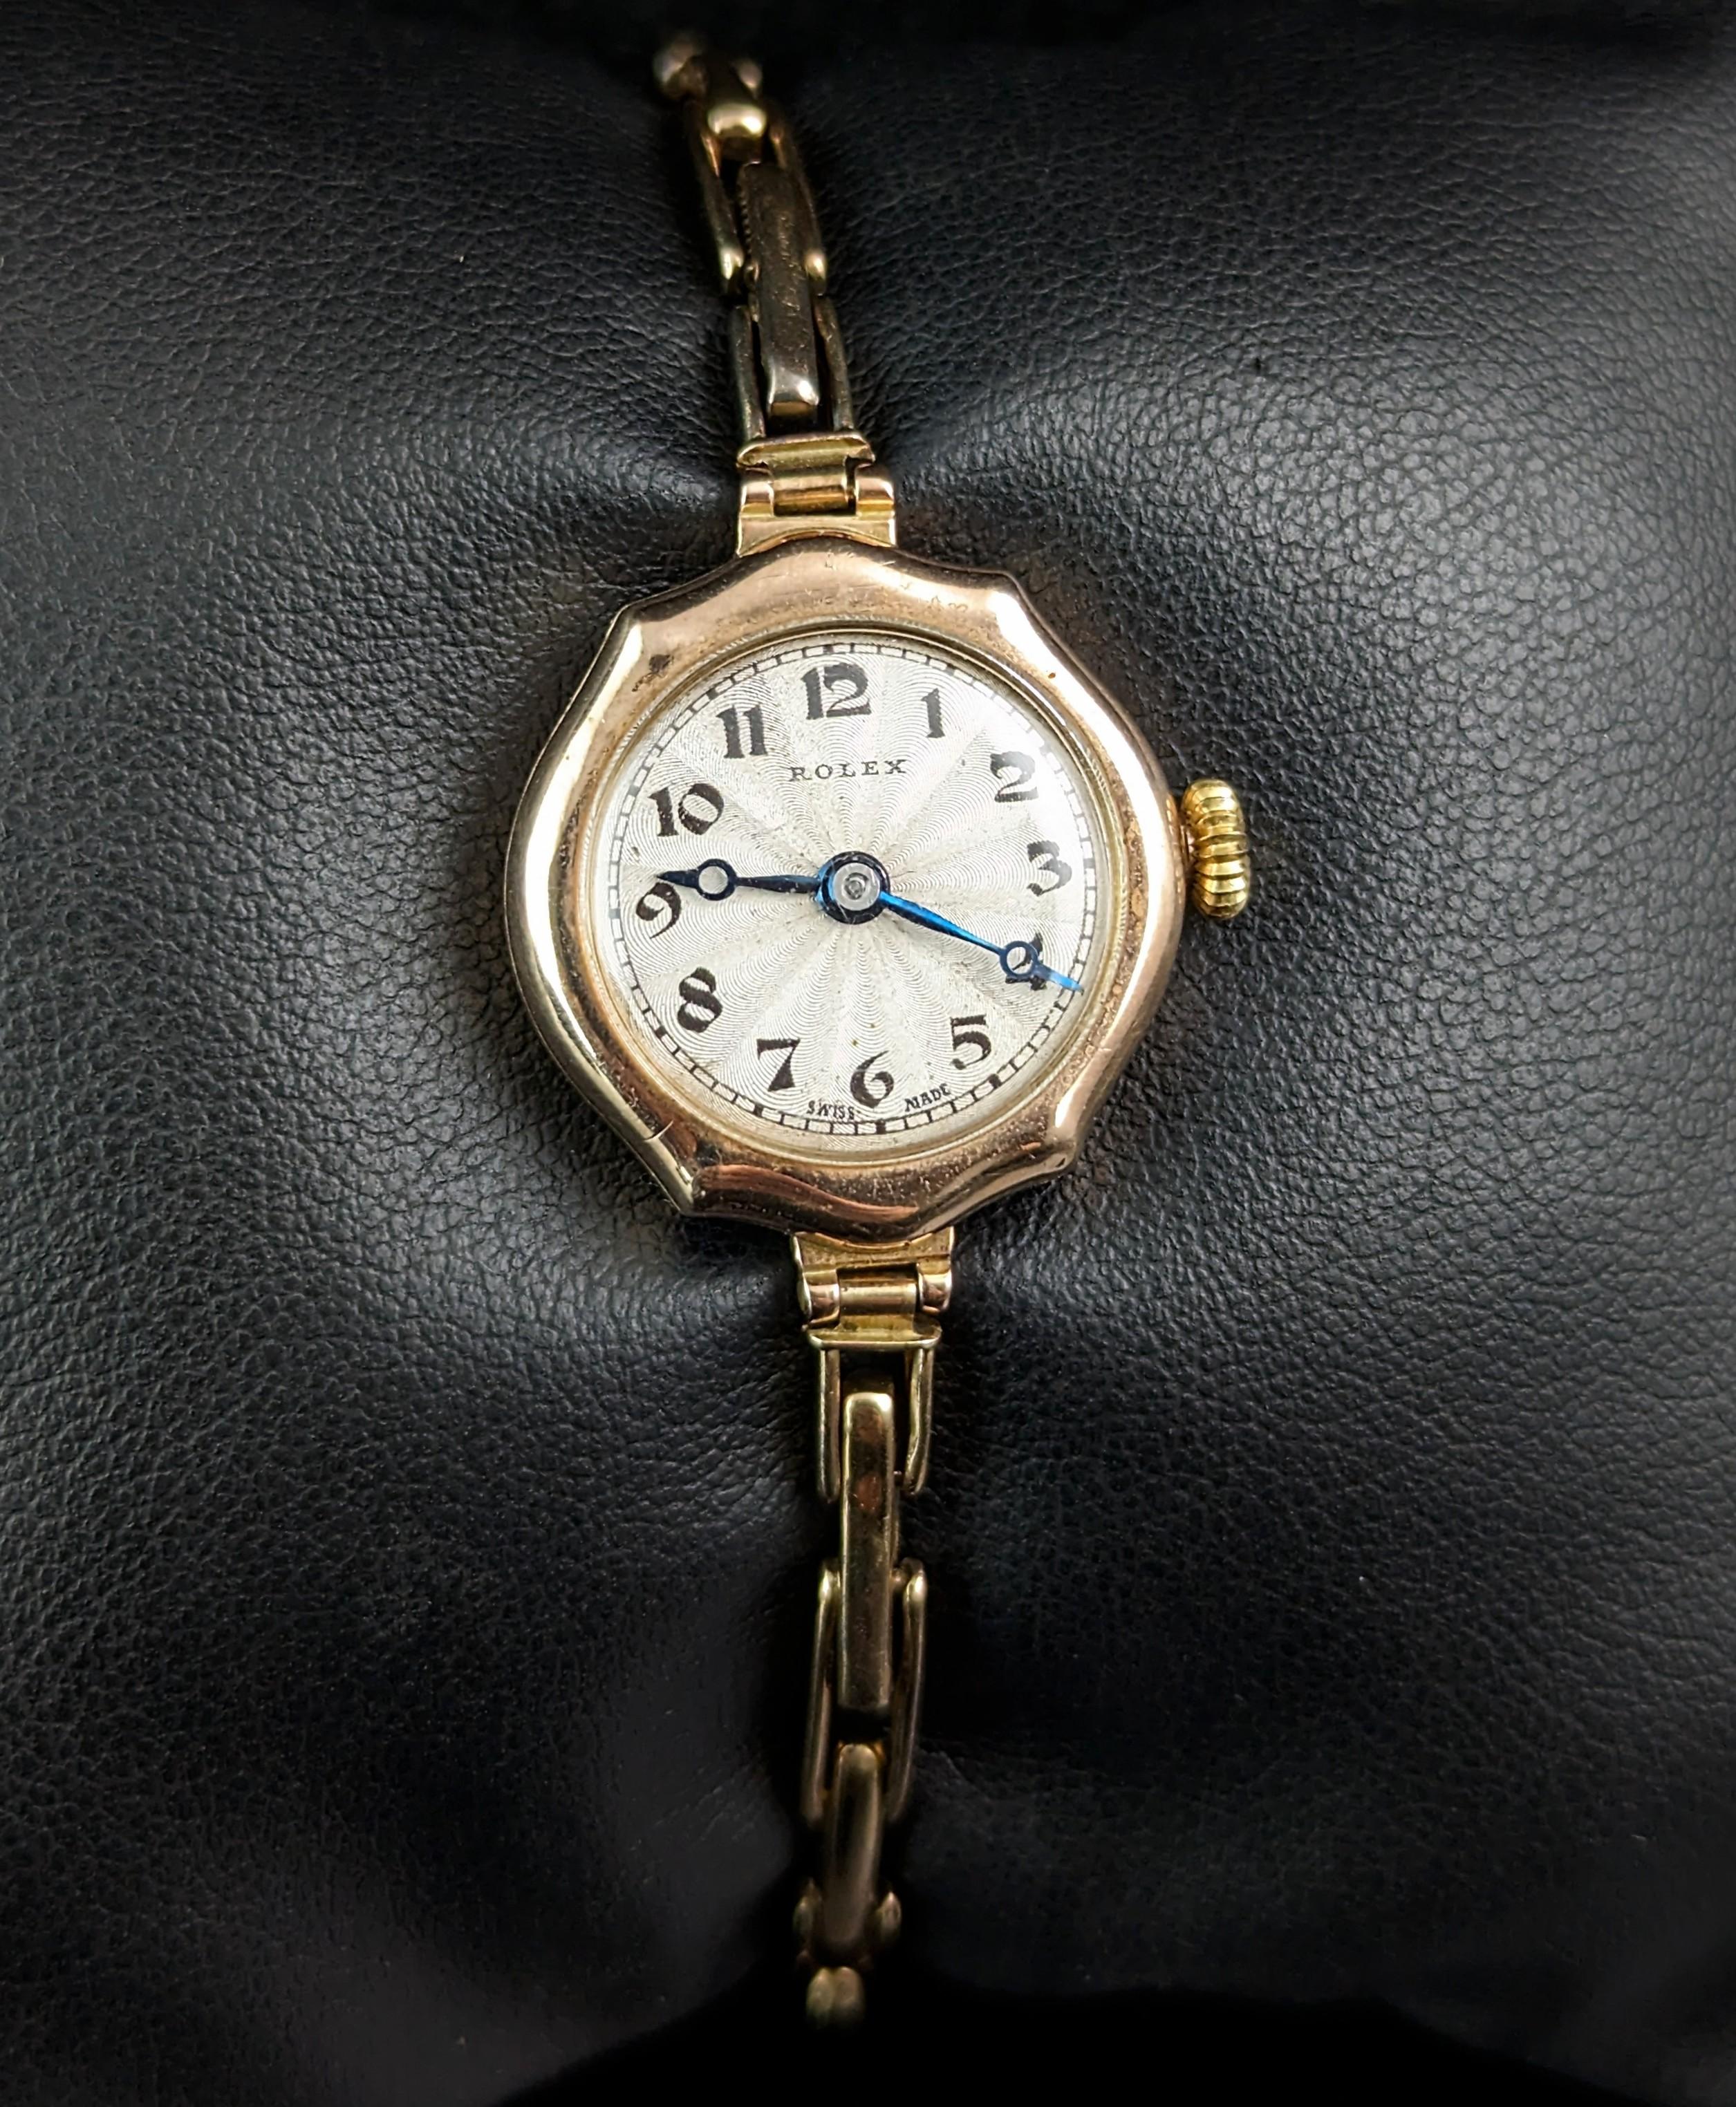 The perfect classic timepiece is what you wil find with this vintage ladies 9ct gold Rolex wristwatch.

It features a hexagonal shape case in 9ct gold marked on the outer case and internally hallmarked, the watch has a silvered dial and is branded